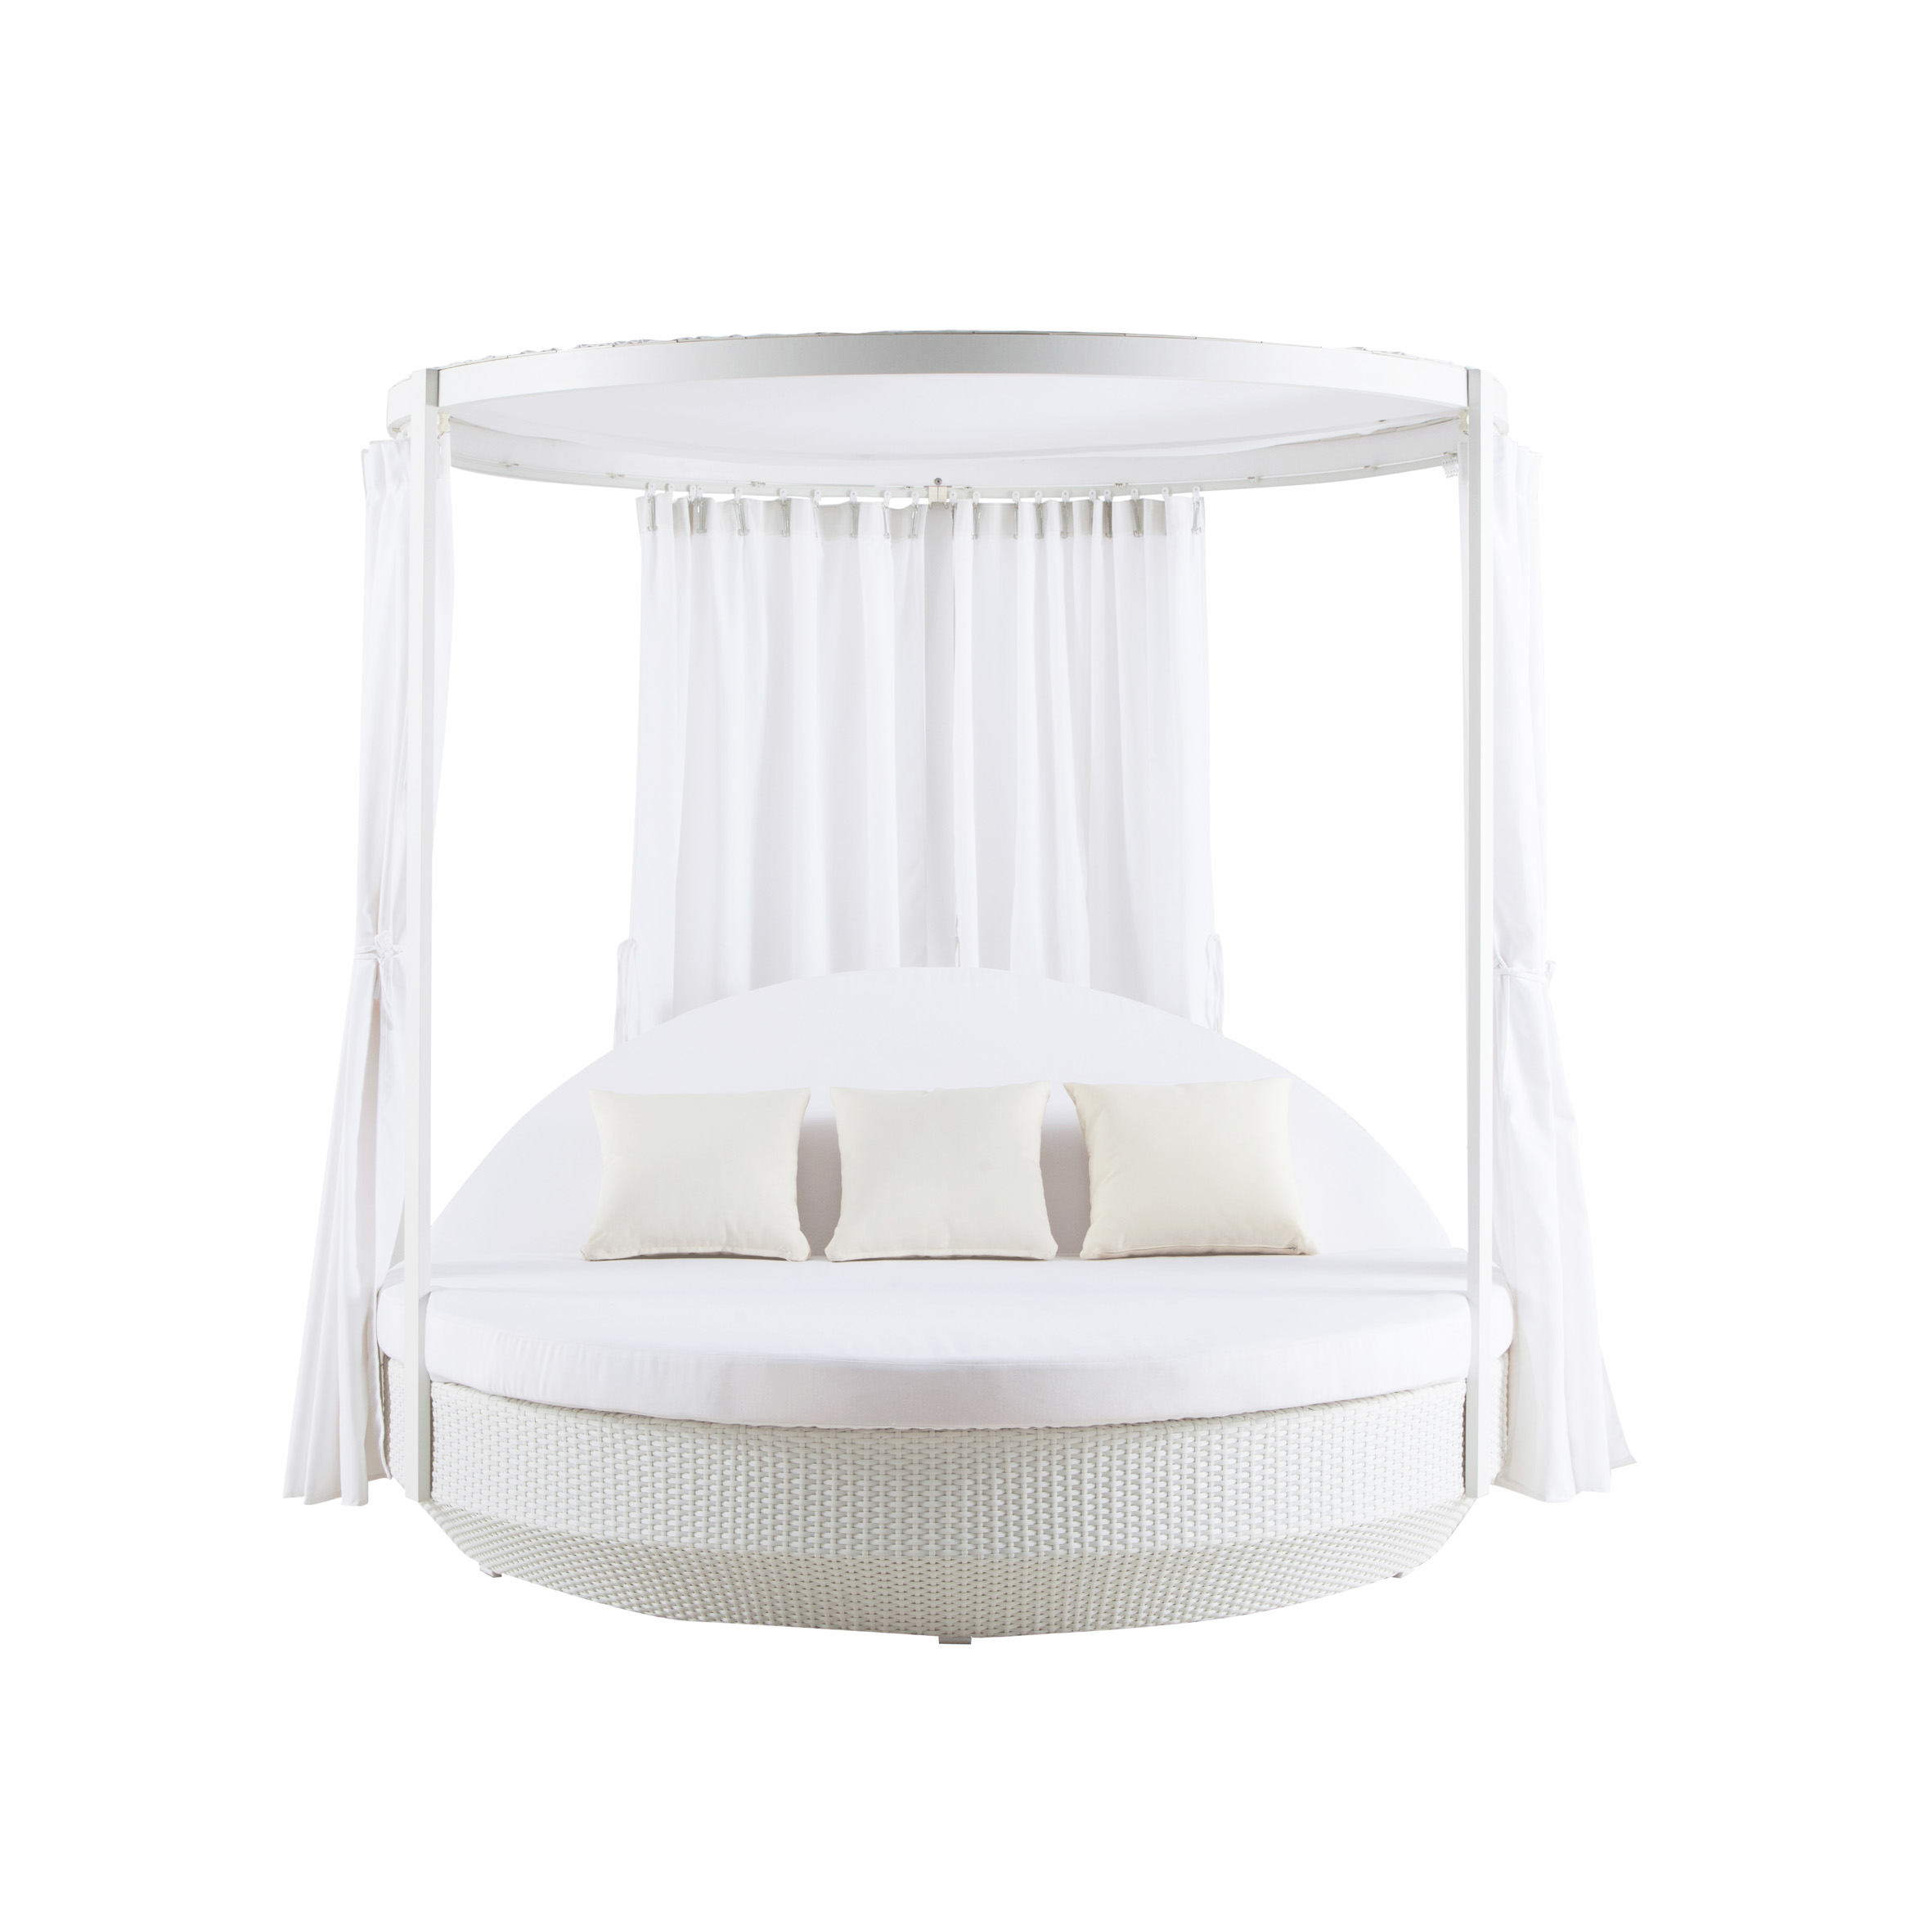 Paradise rattan daybed with curtain S3